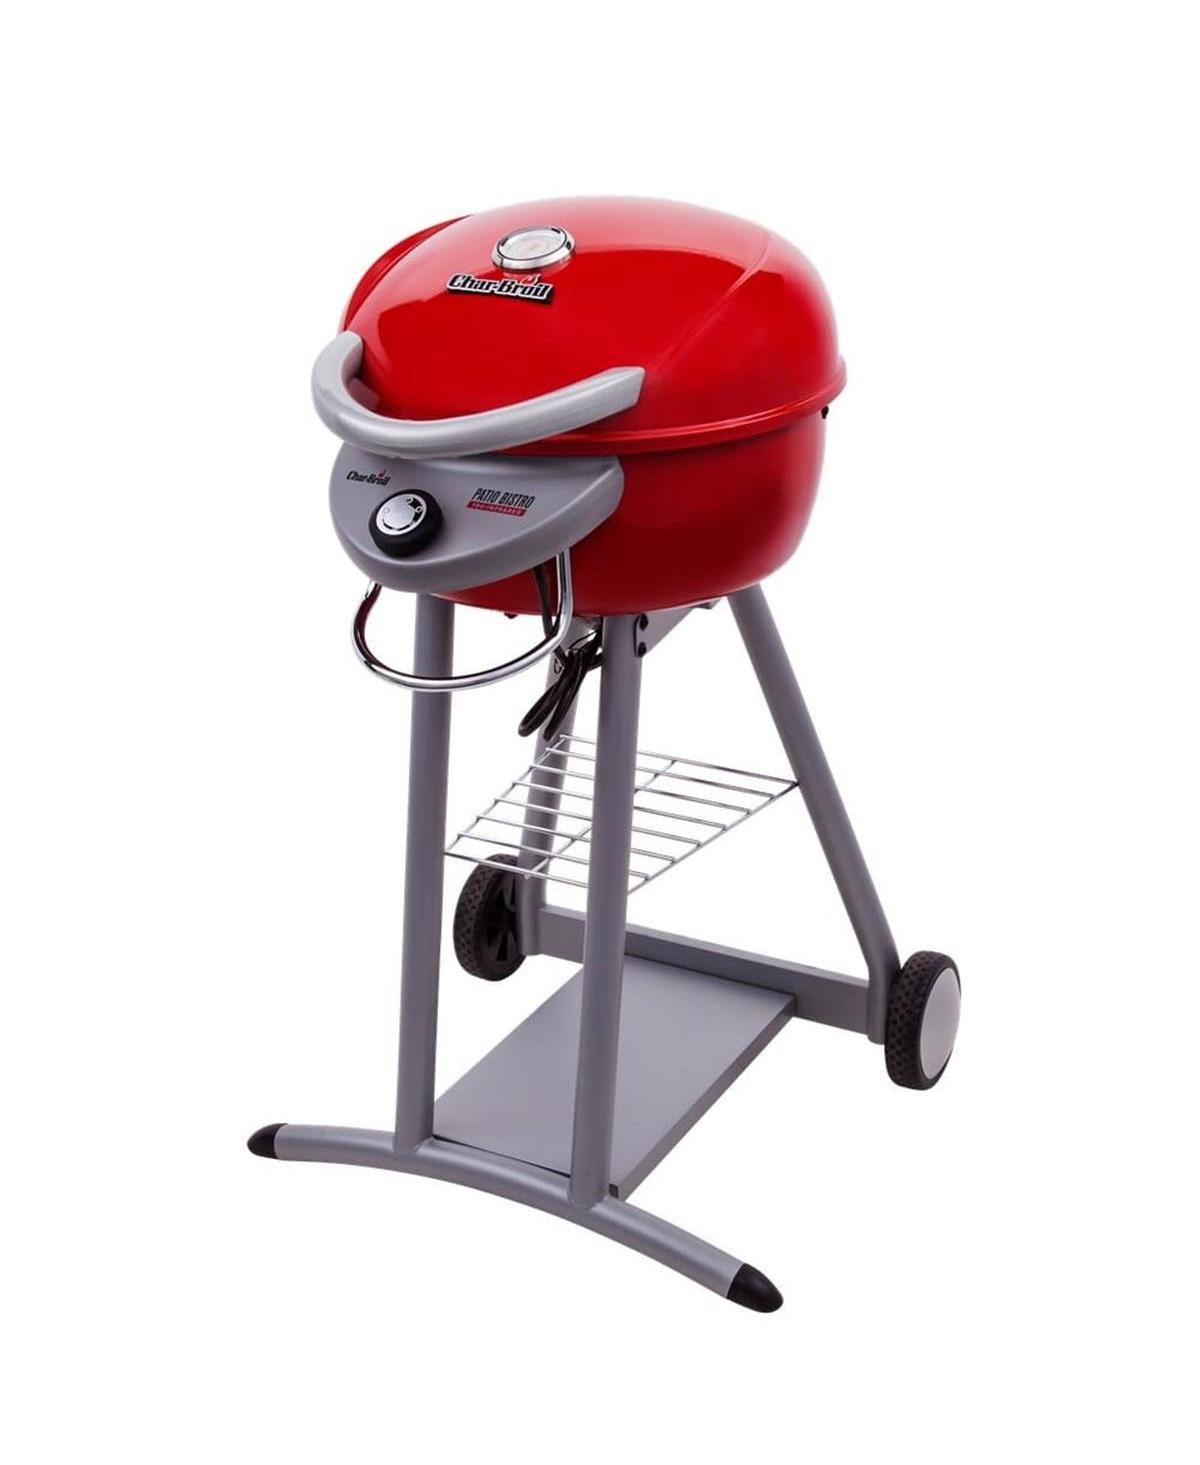 20602109 Patio Bistro Electric Grill - Red